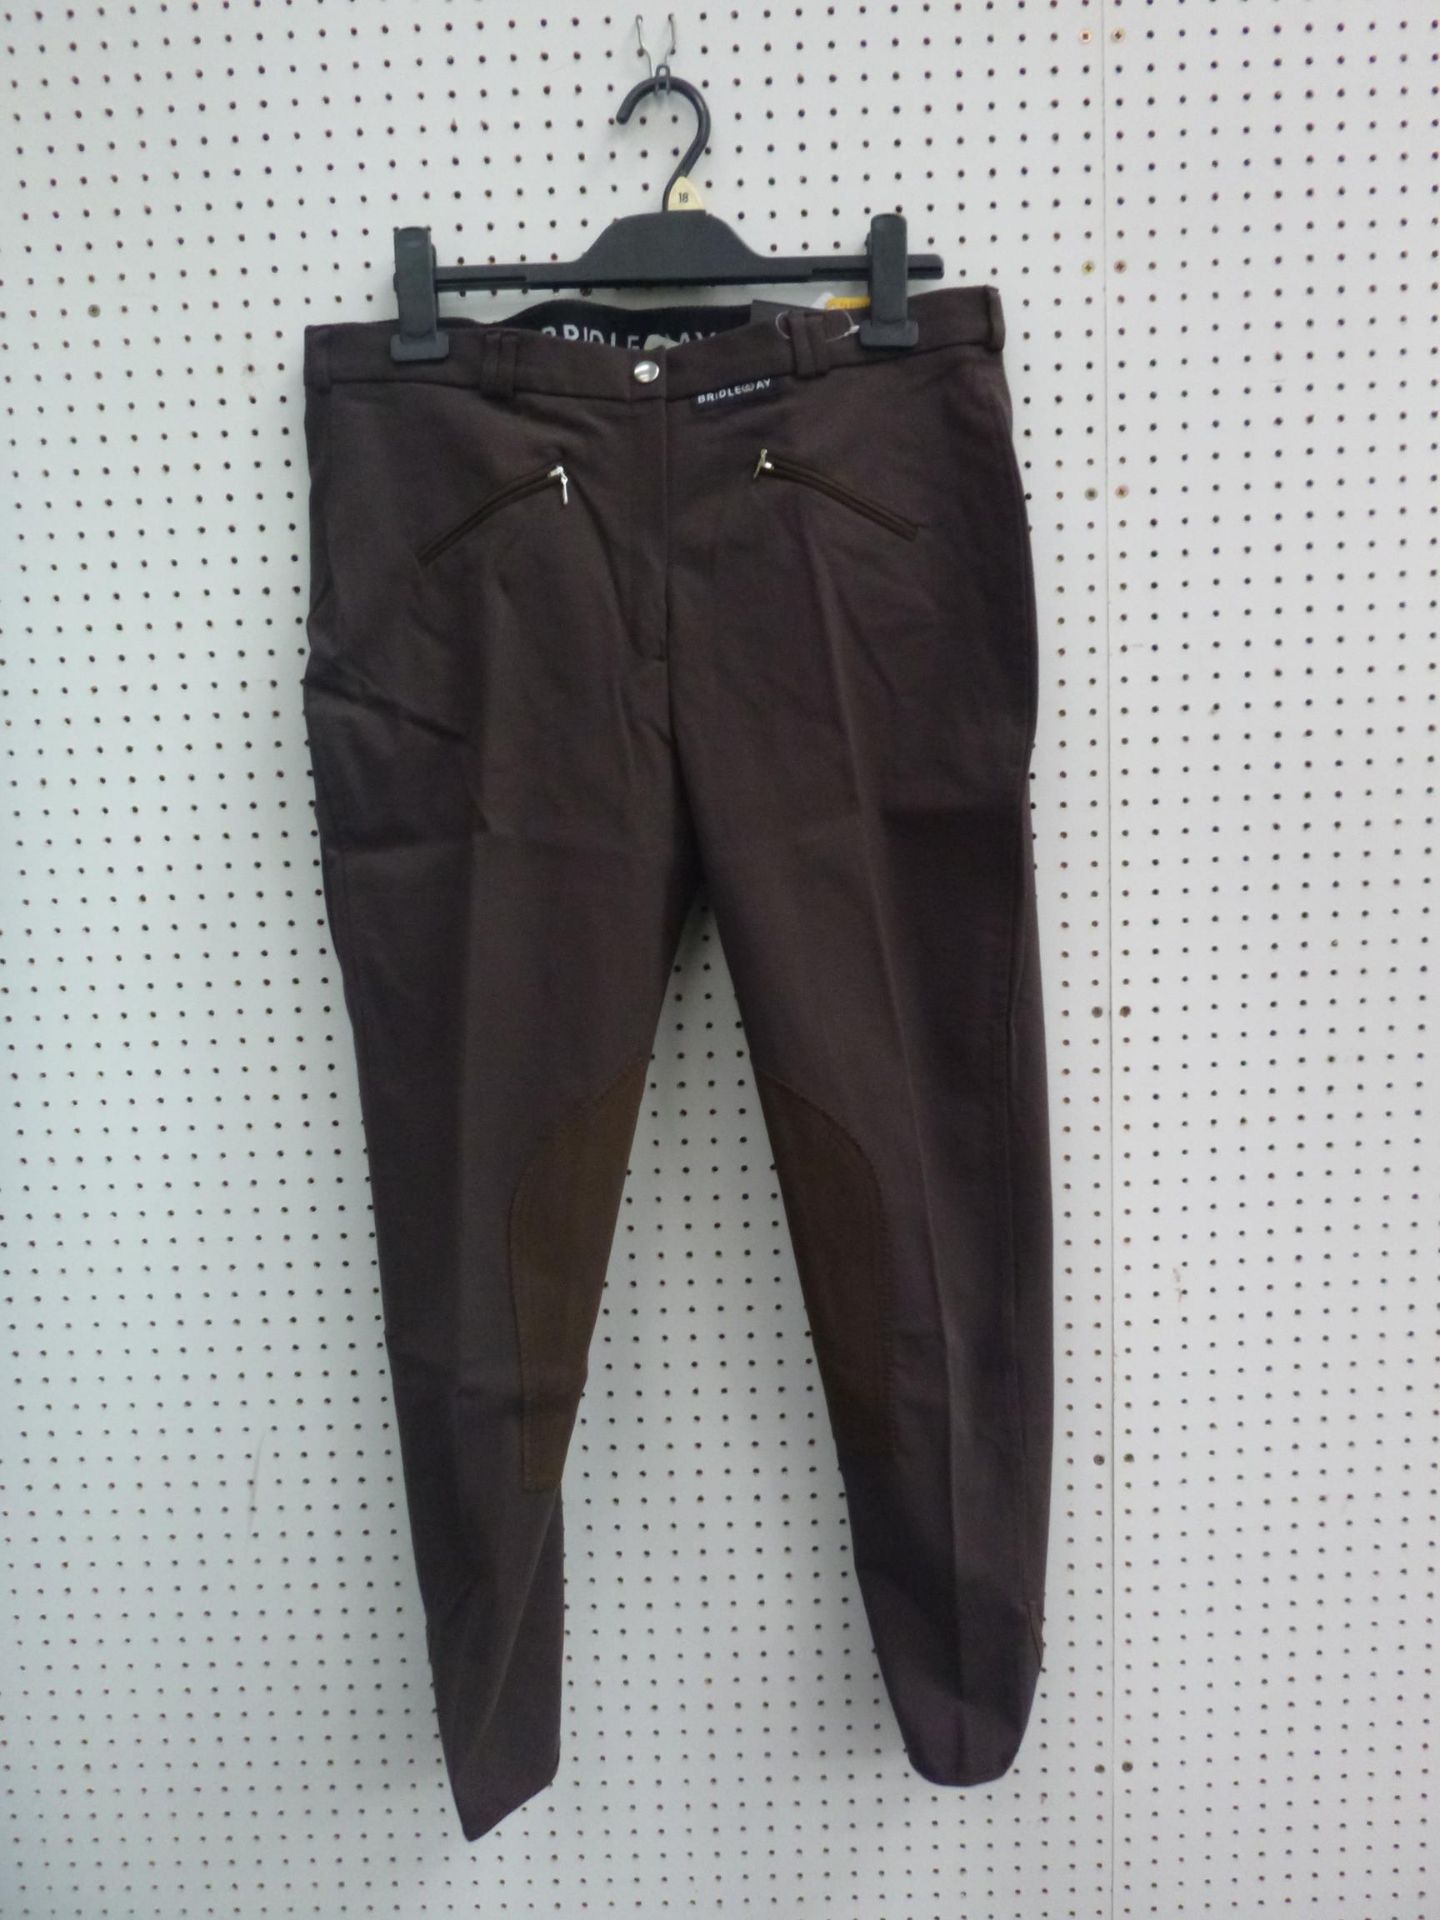 * Two pairs of new Bridleway Ladies Woven Cotton/Nylon Breeches size 38R, one Brown the other - Image 3 of 4